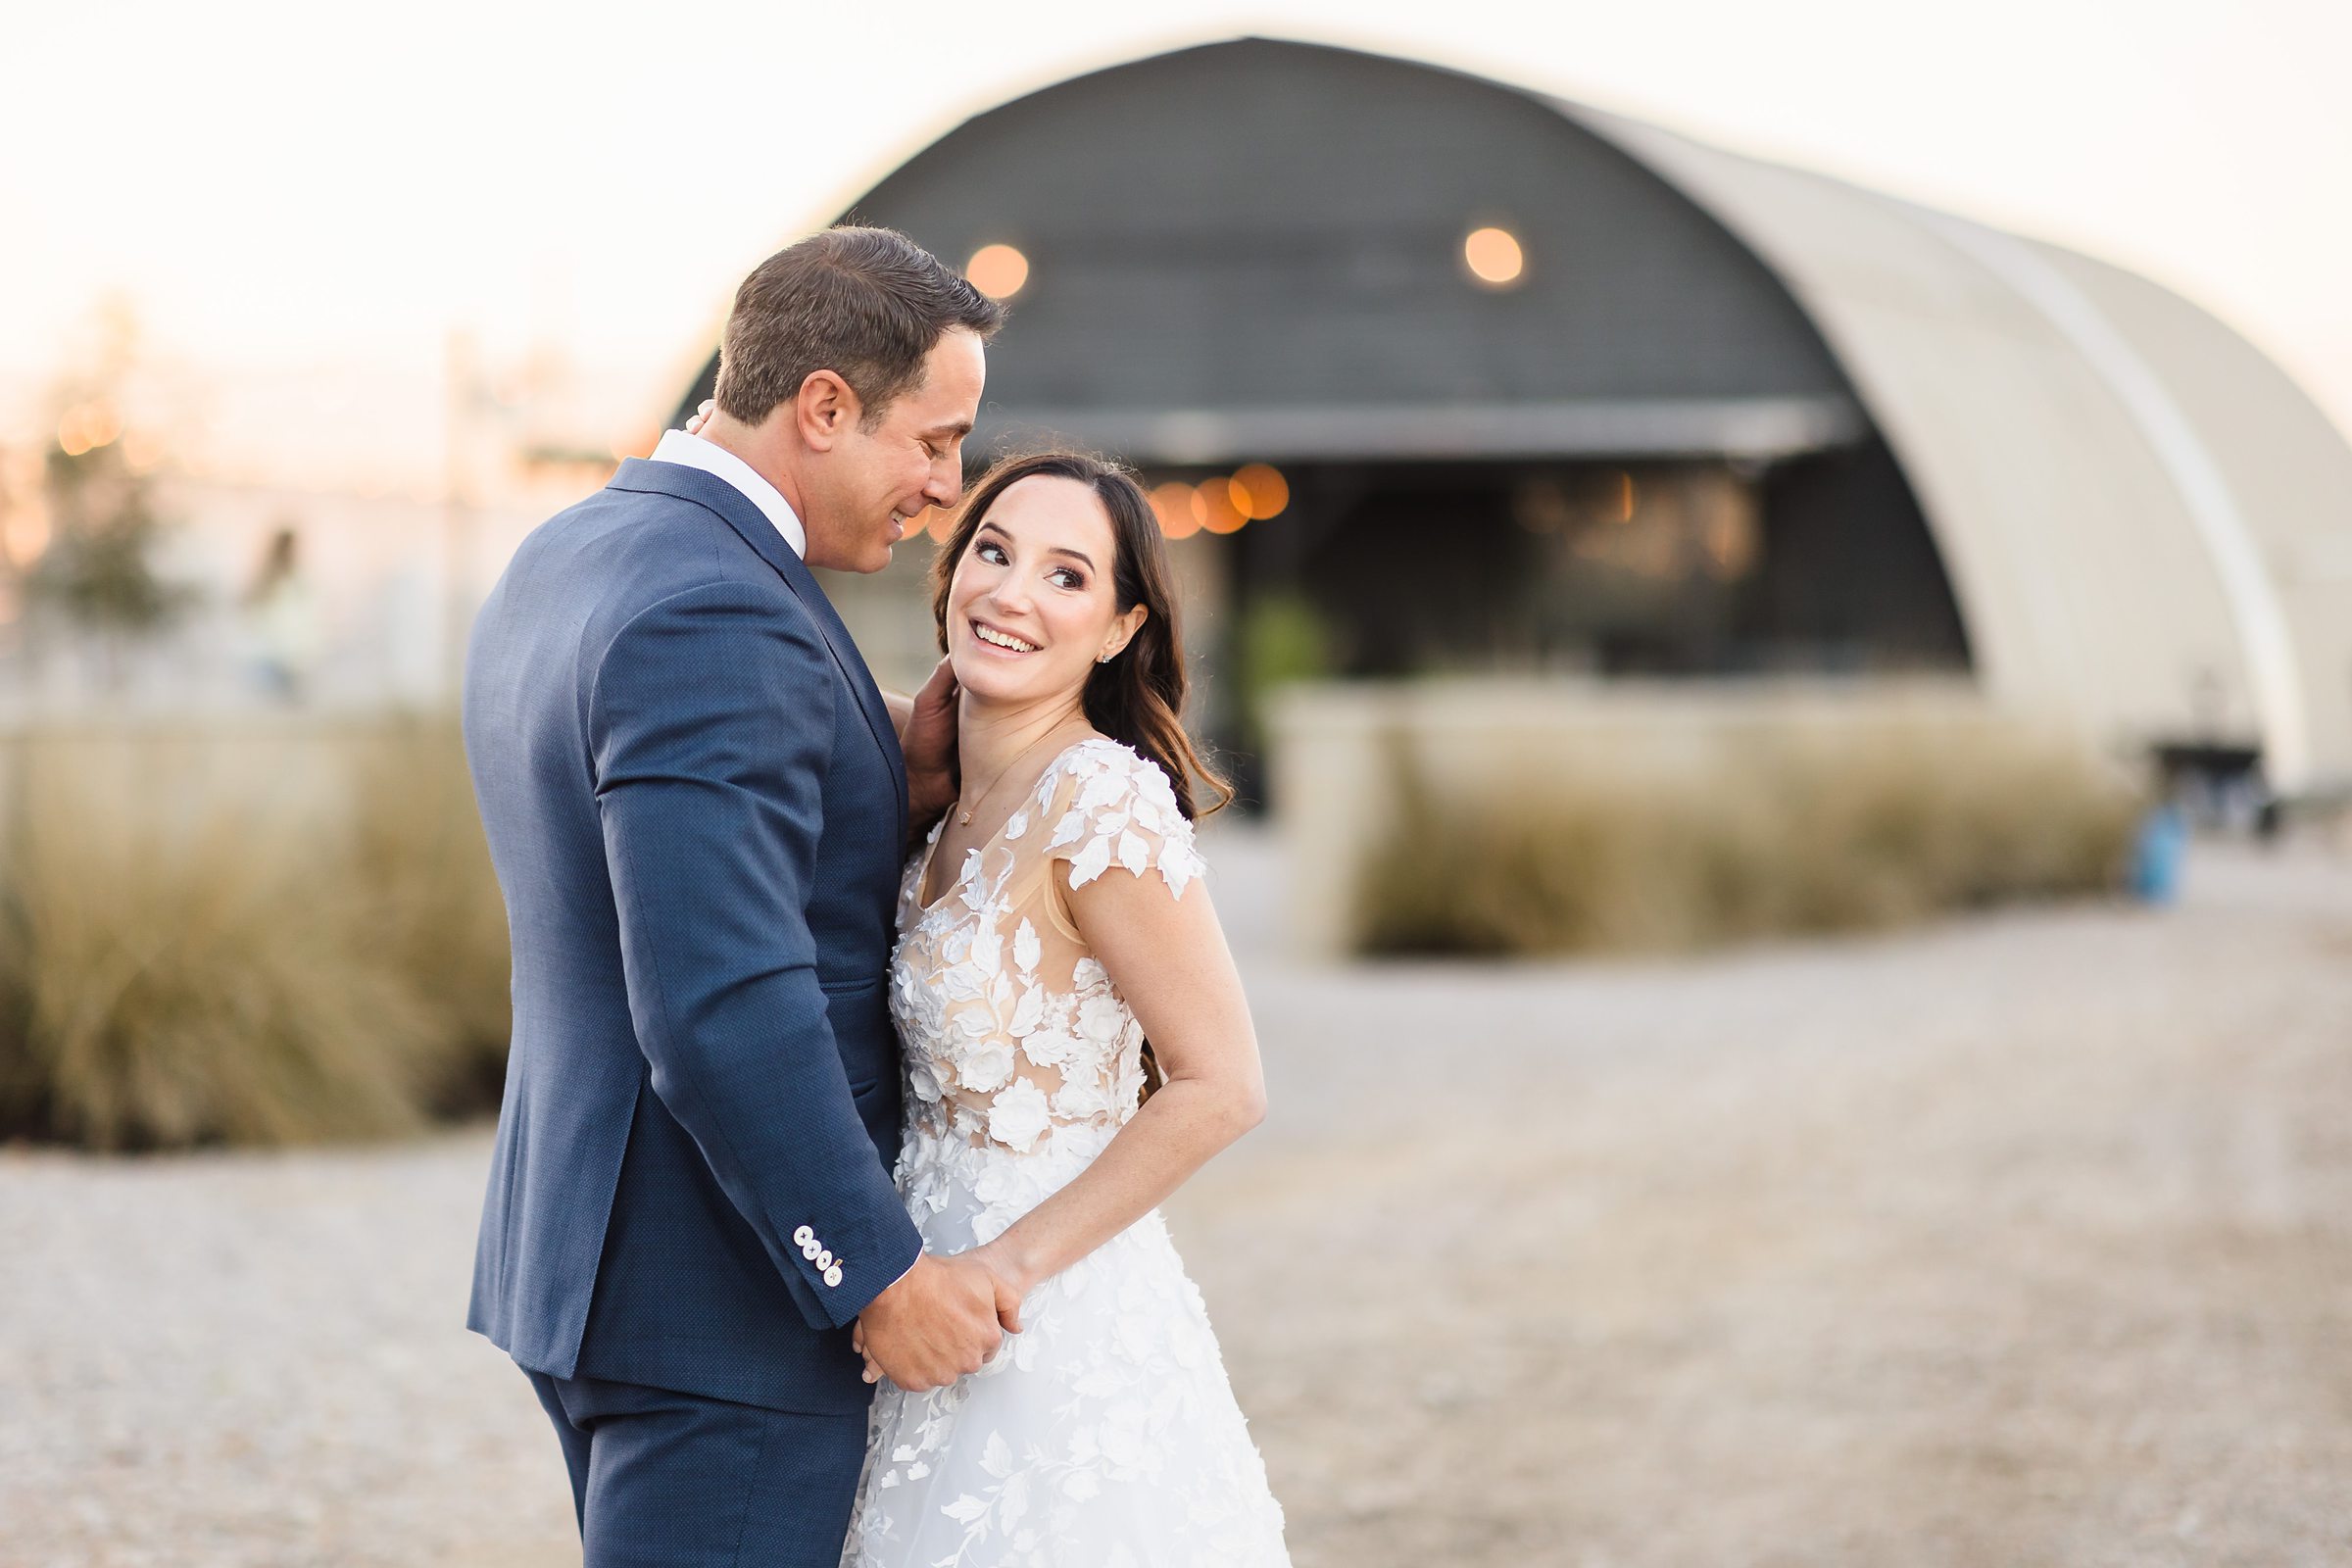 Couple Embraces during their wedding at the Camino Real Ranch in Buda, Texas